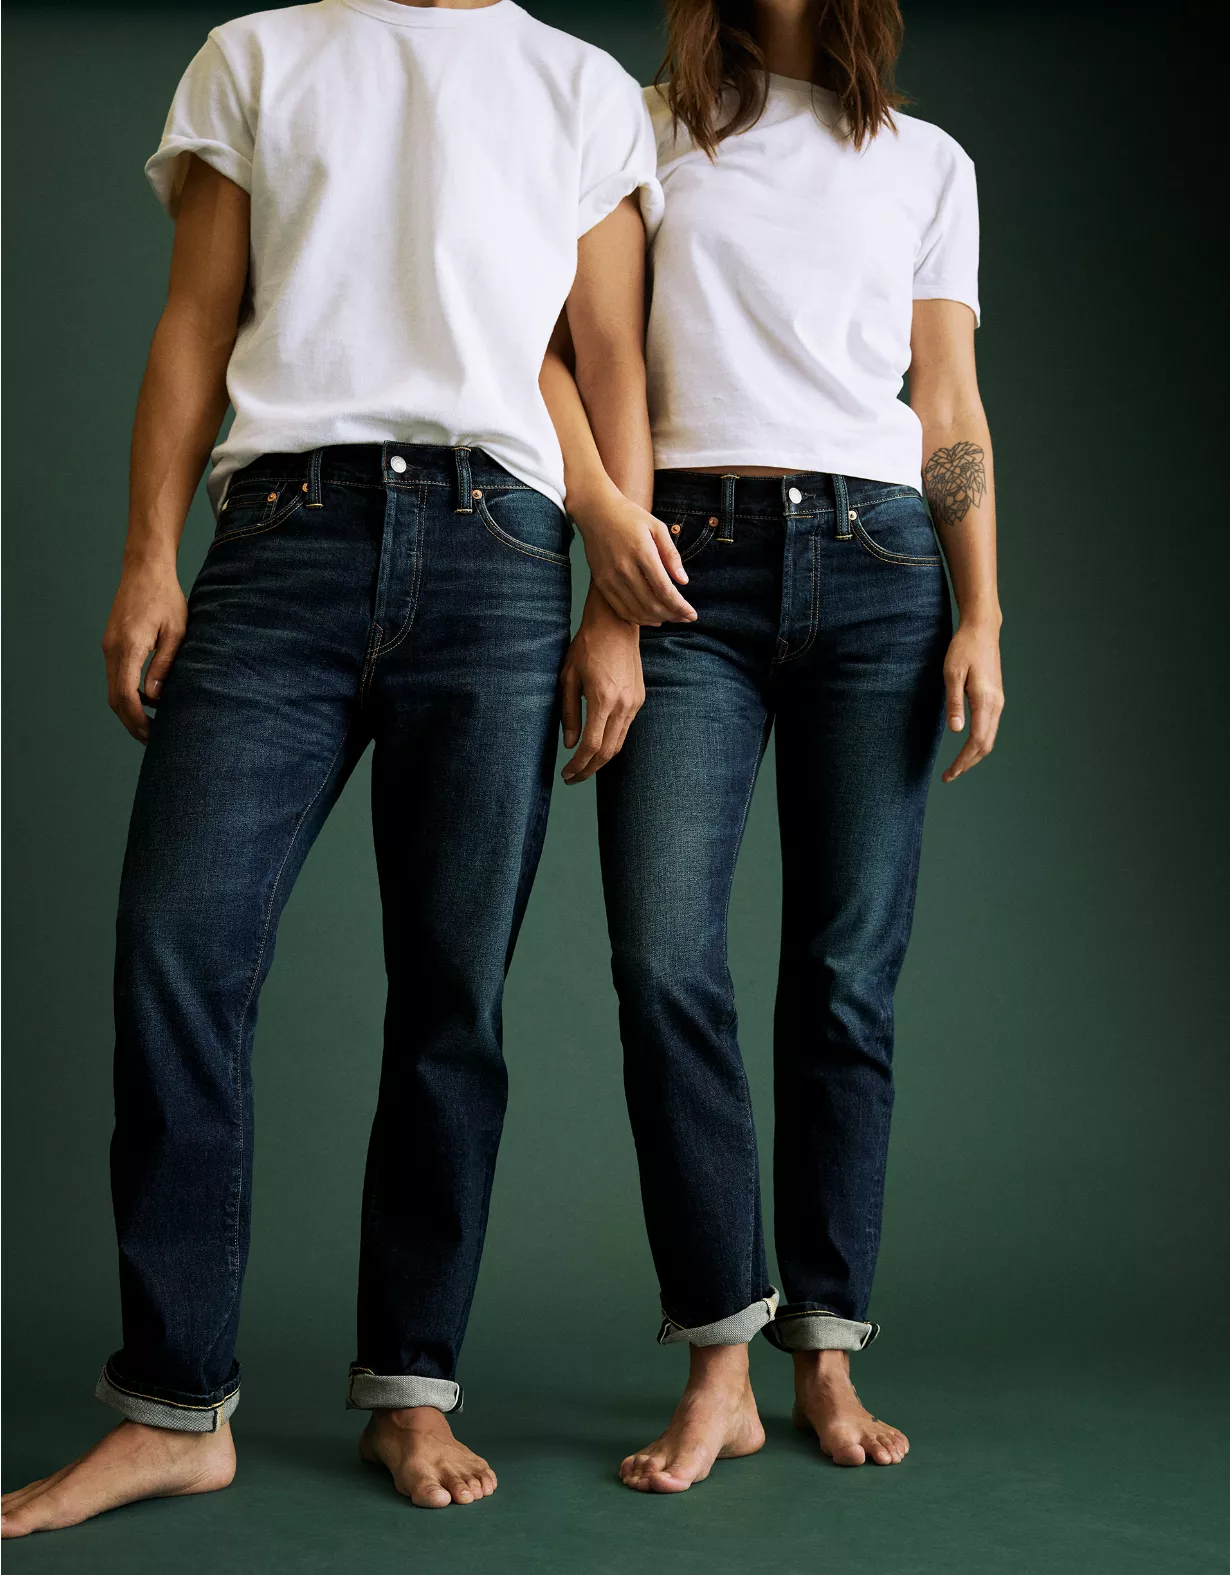 AE77 All-Gender Classic Jean